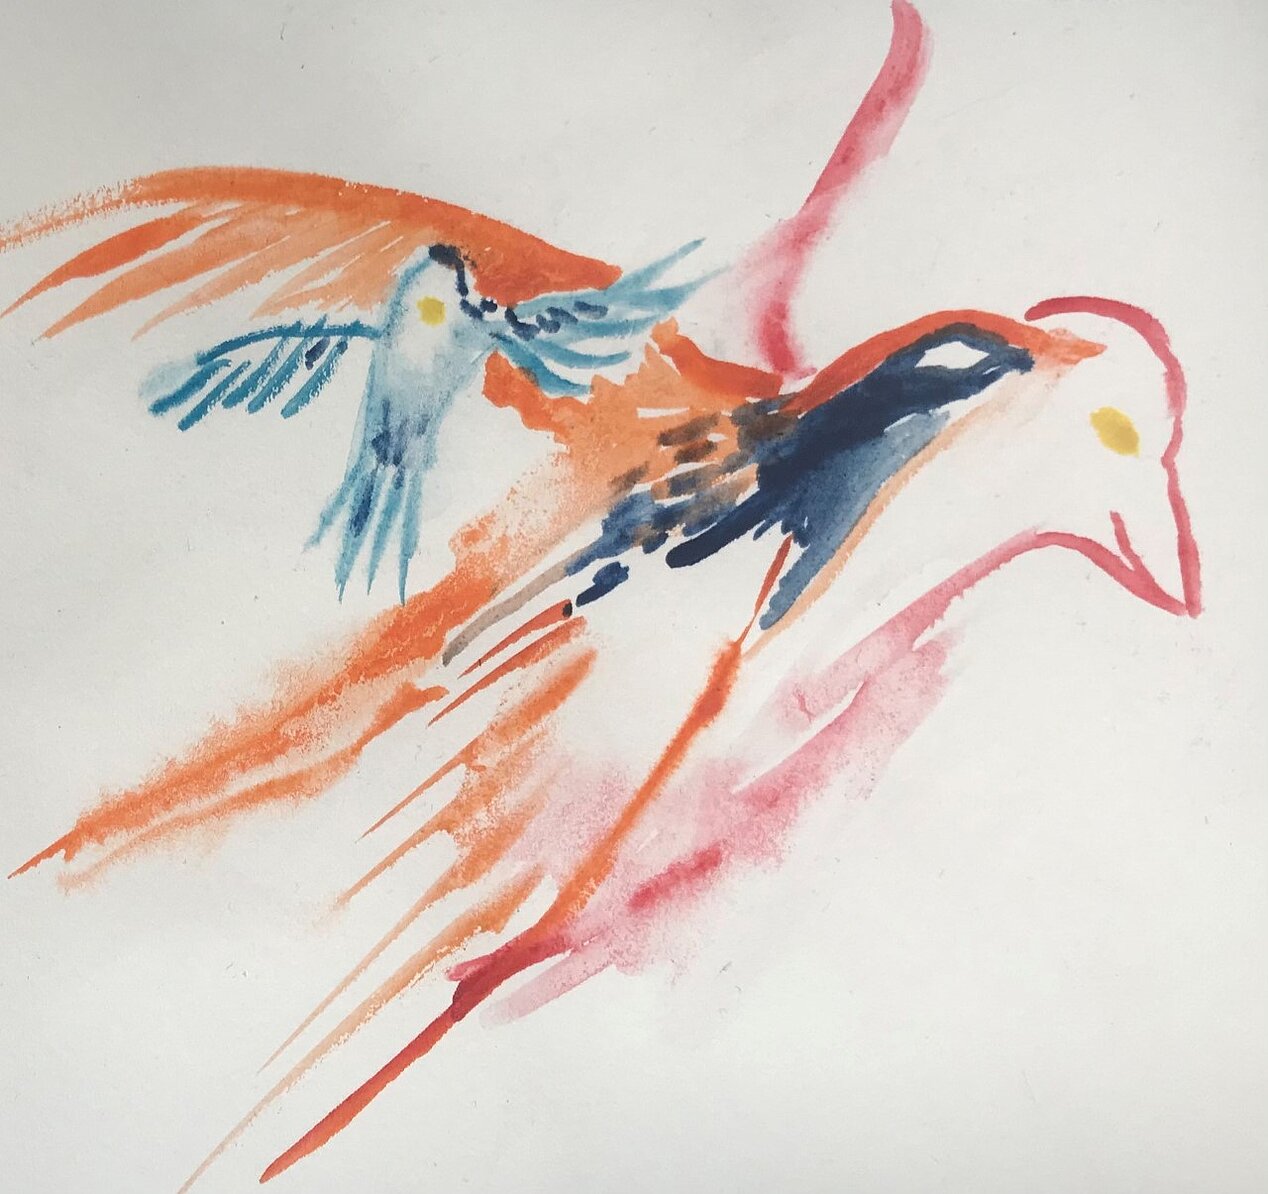 The painting shows a large bird carrying other birds on its back and under its wings. Thus, the smaller birds are part of the big bird. The painting is characterized by light tones of red and orange, while the smaller birds colored in shades of blue make contrast to the larger bird. All birds are looking up with their body aimed at flying. The picture is part of the children's art workshop "The Parade of Birds", which will be shown as part of the exhibition "The Canticle of the Birds" from May 13 to July 30 at the ifa Gallery in Berlin.